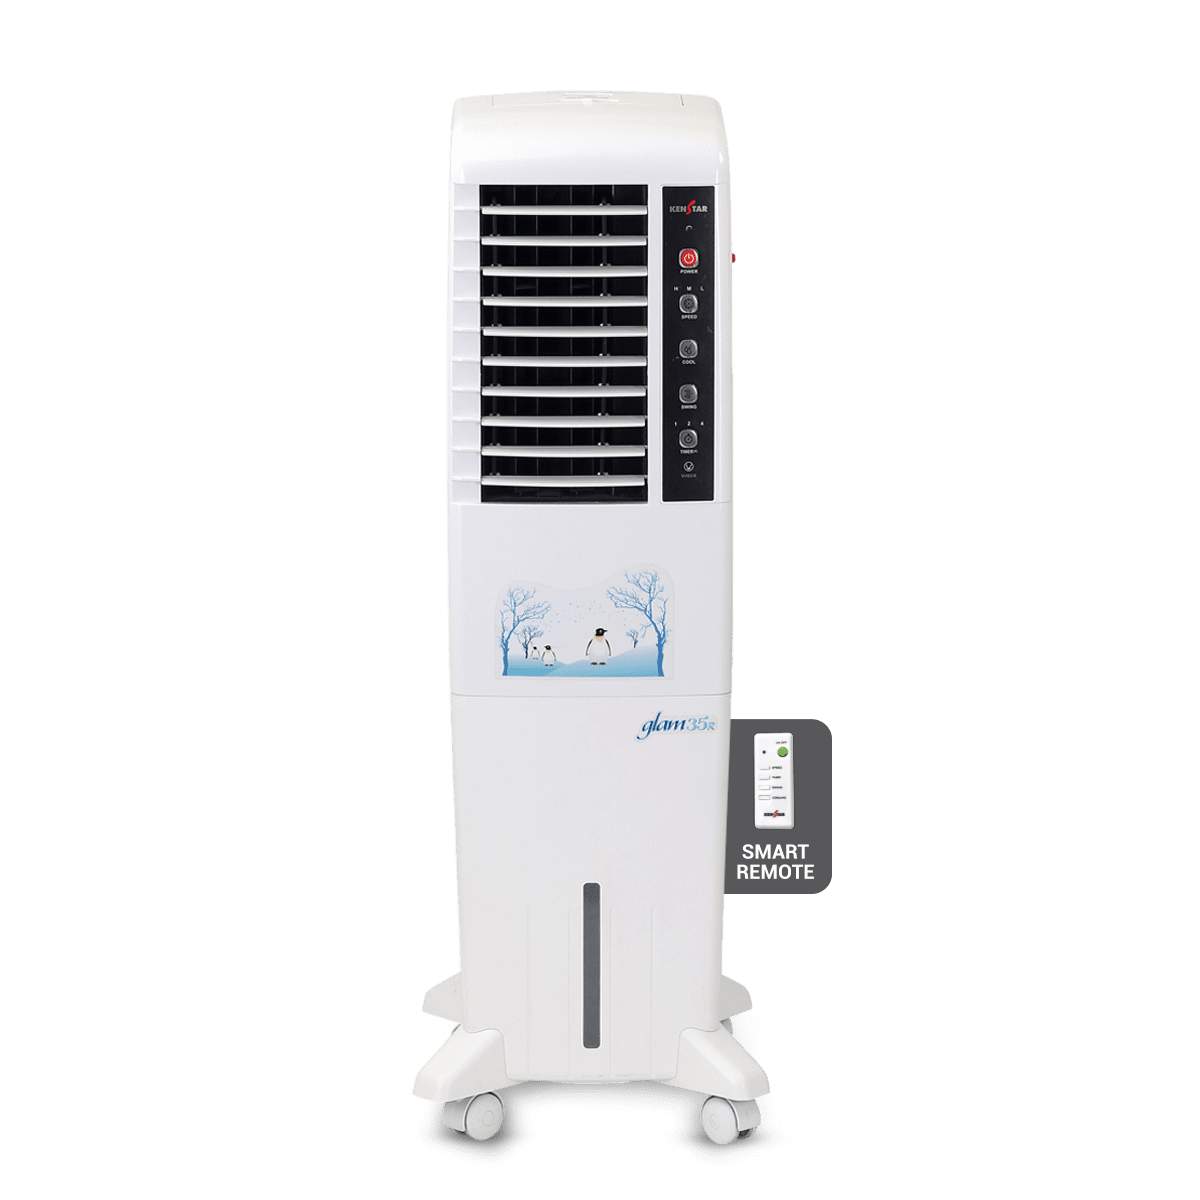 Kenstar Glam 35 litre Air Cooler with Remote On Dillimall.Com